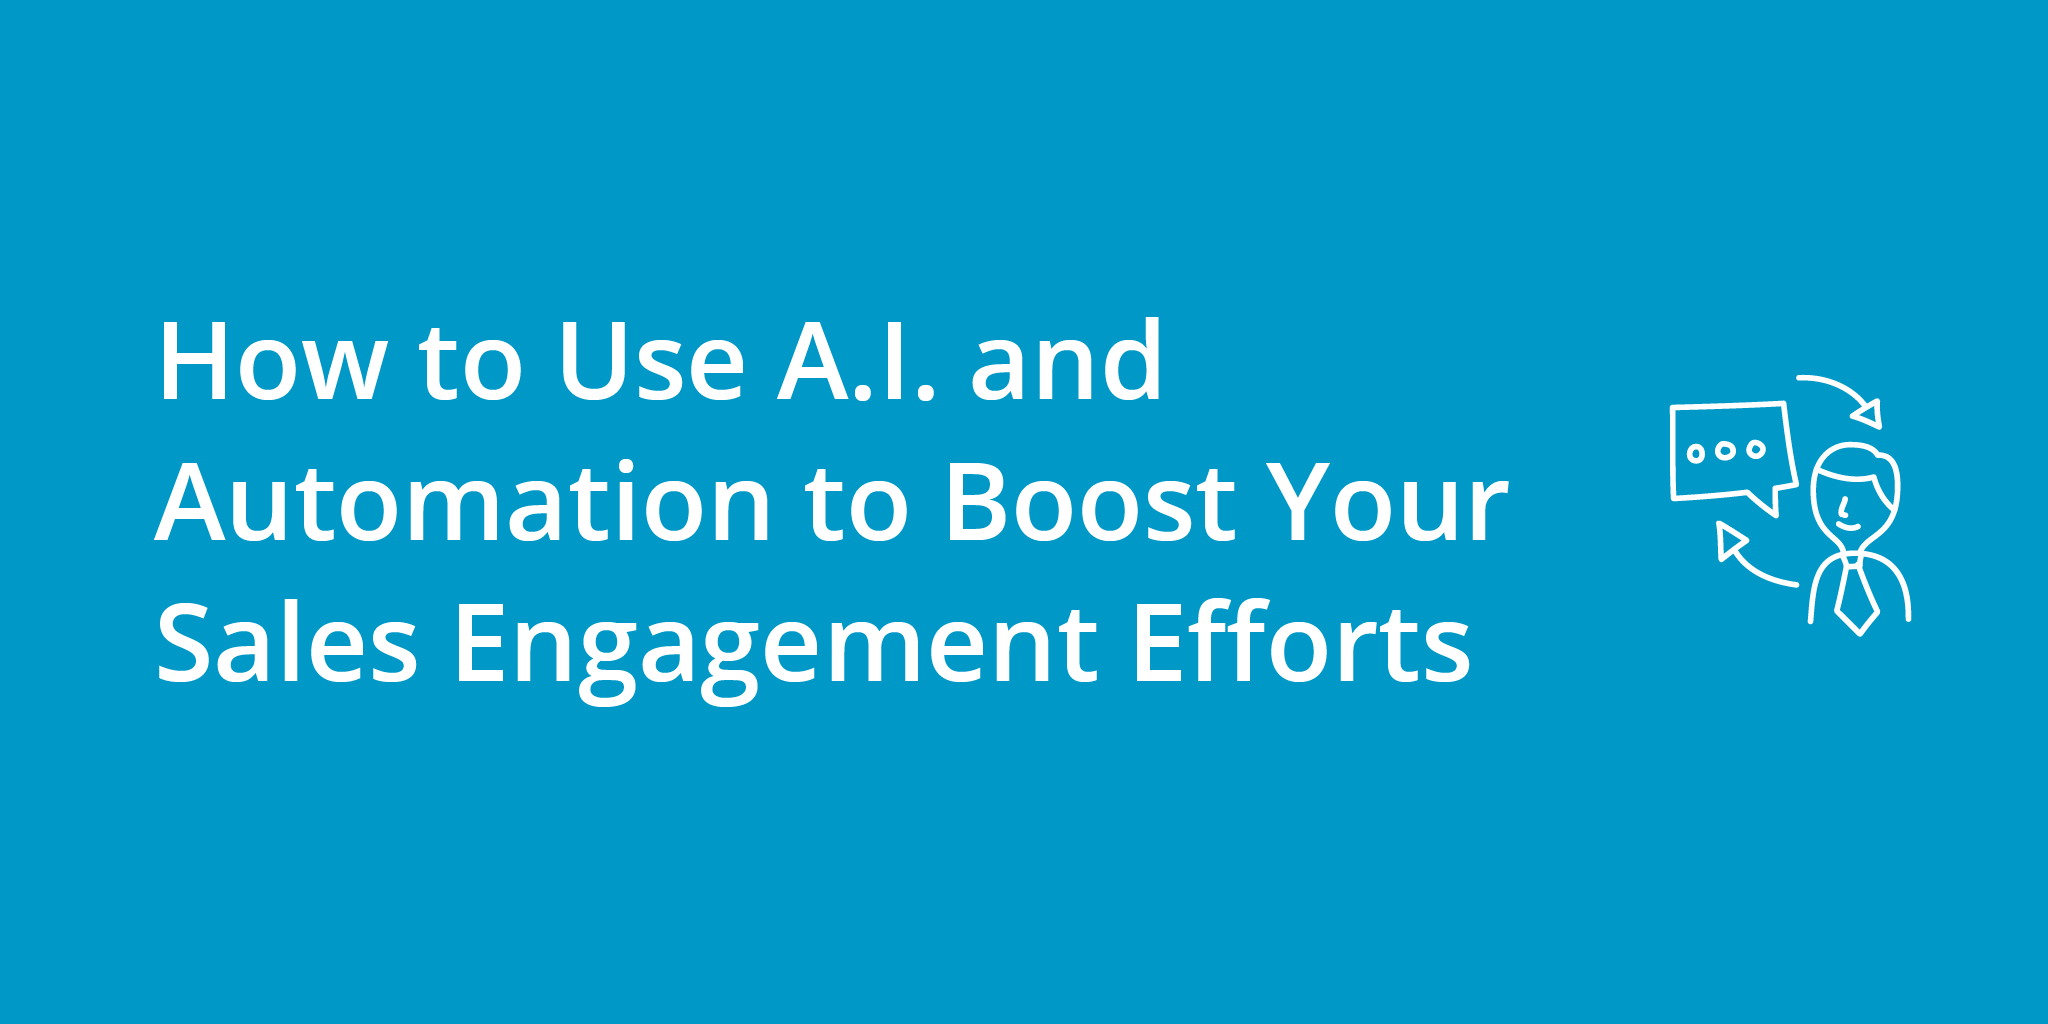 How to Use A.I. and Automation to Boost Your Sales Engagement Efforts | Telephones for business